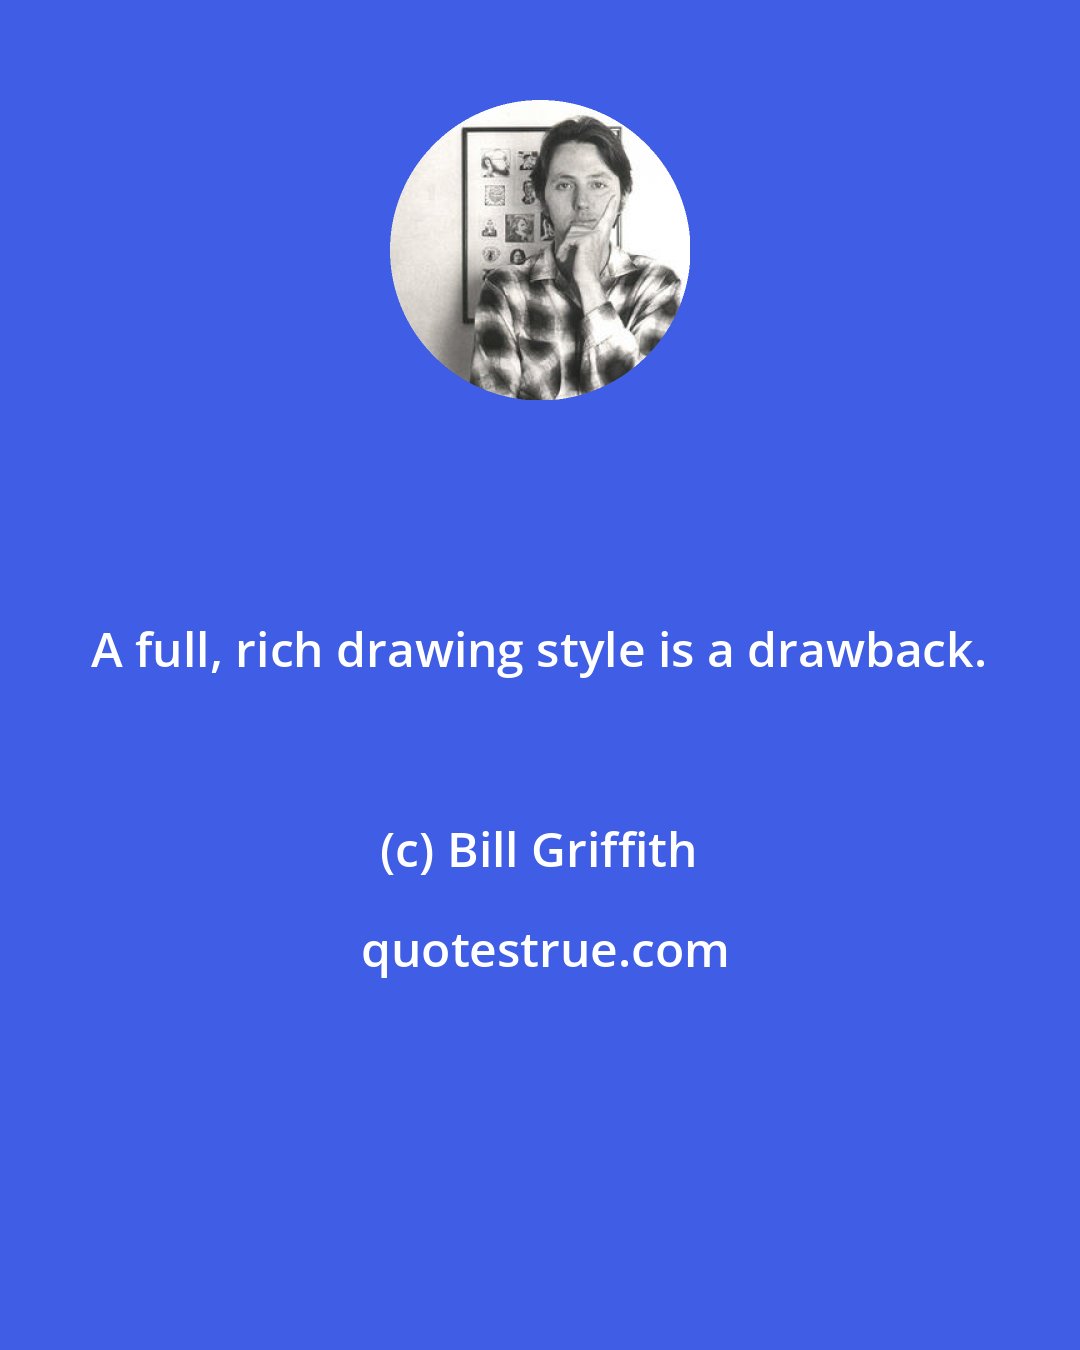 Bill Griffith: A full, rich drawing style is a drawback.